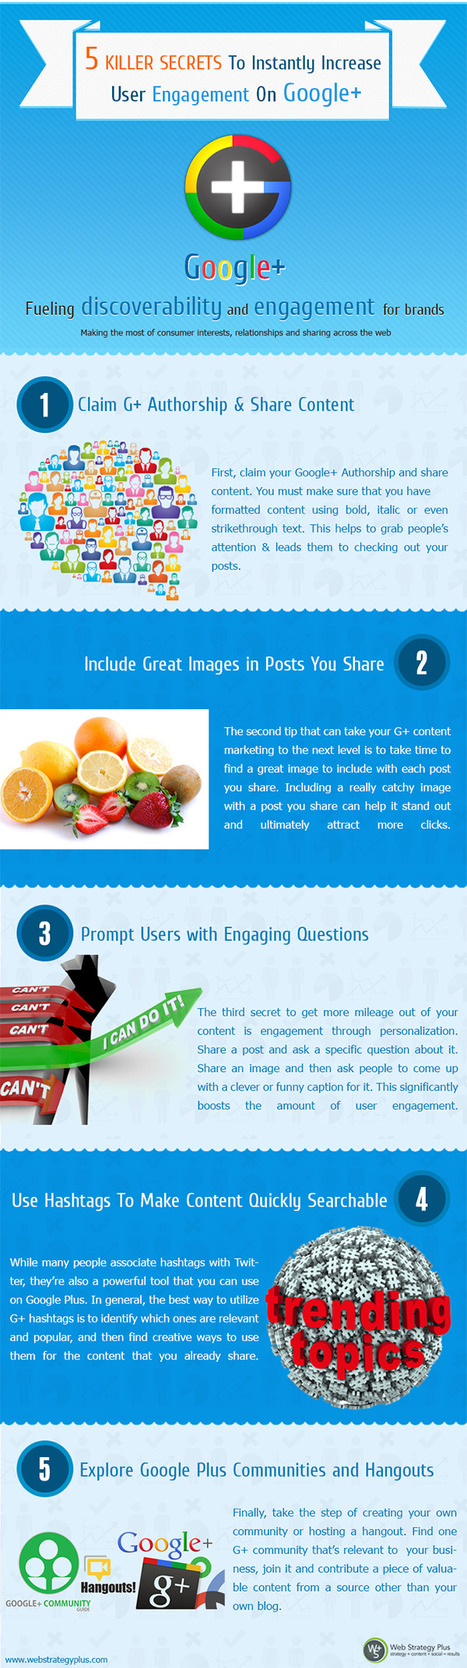 5 Killer Secrets to Instantly Increase Engagement on Google Plus [infographic] | Social Marketing Revolution | Scoop.it